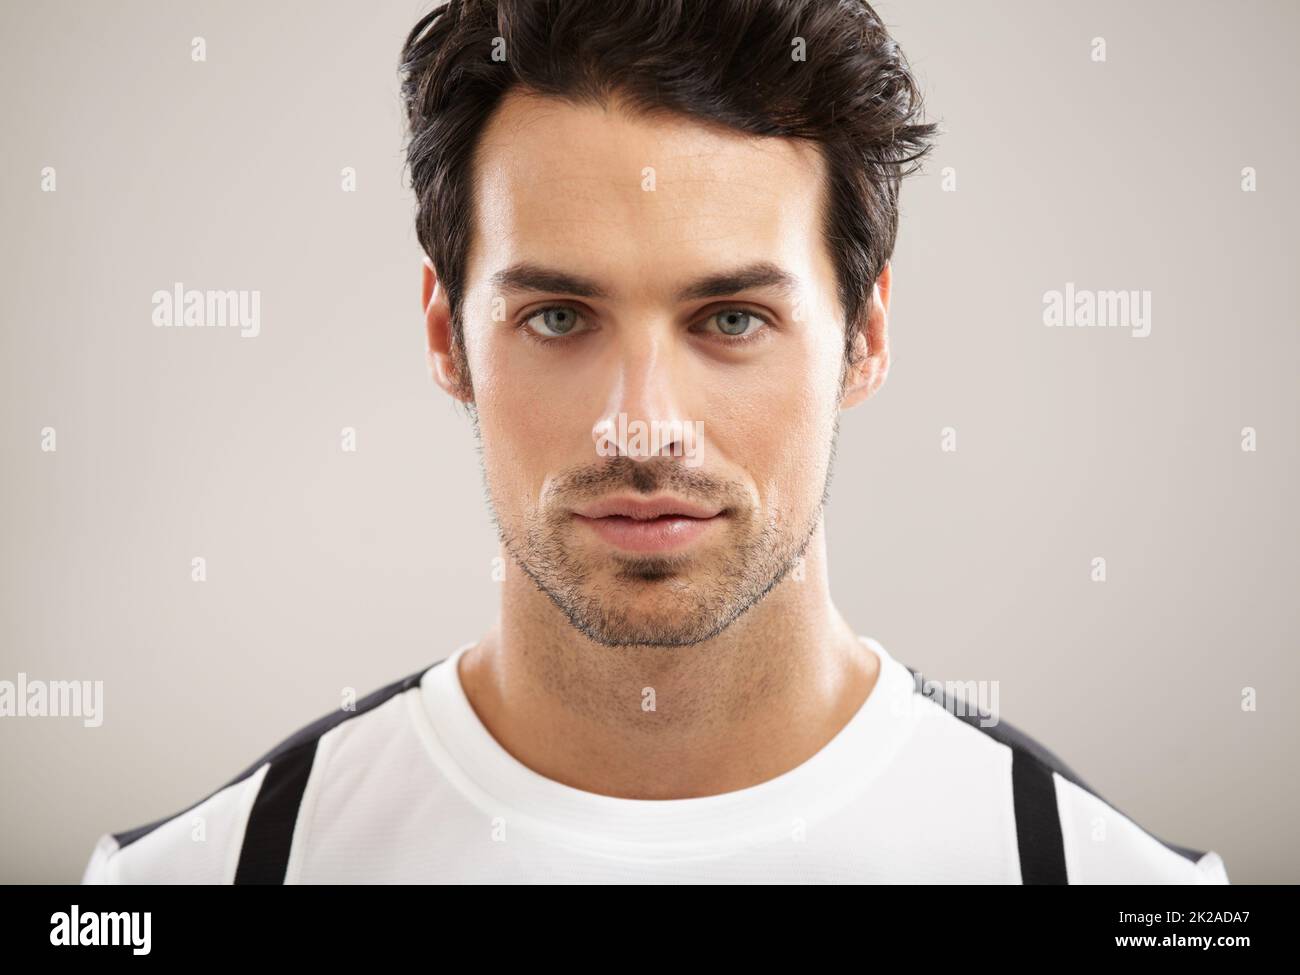 Focused on getting fit. Portrait of a handsome young man. Stock Photo